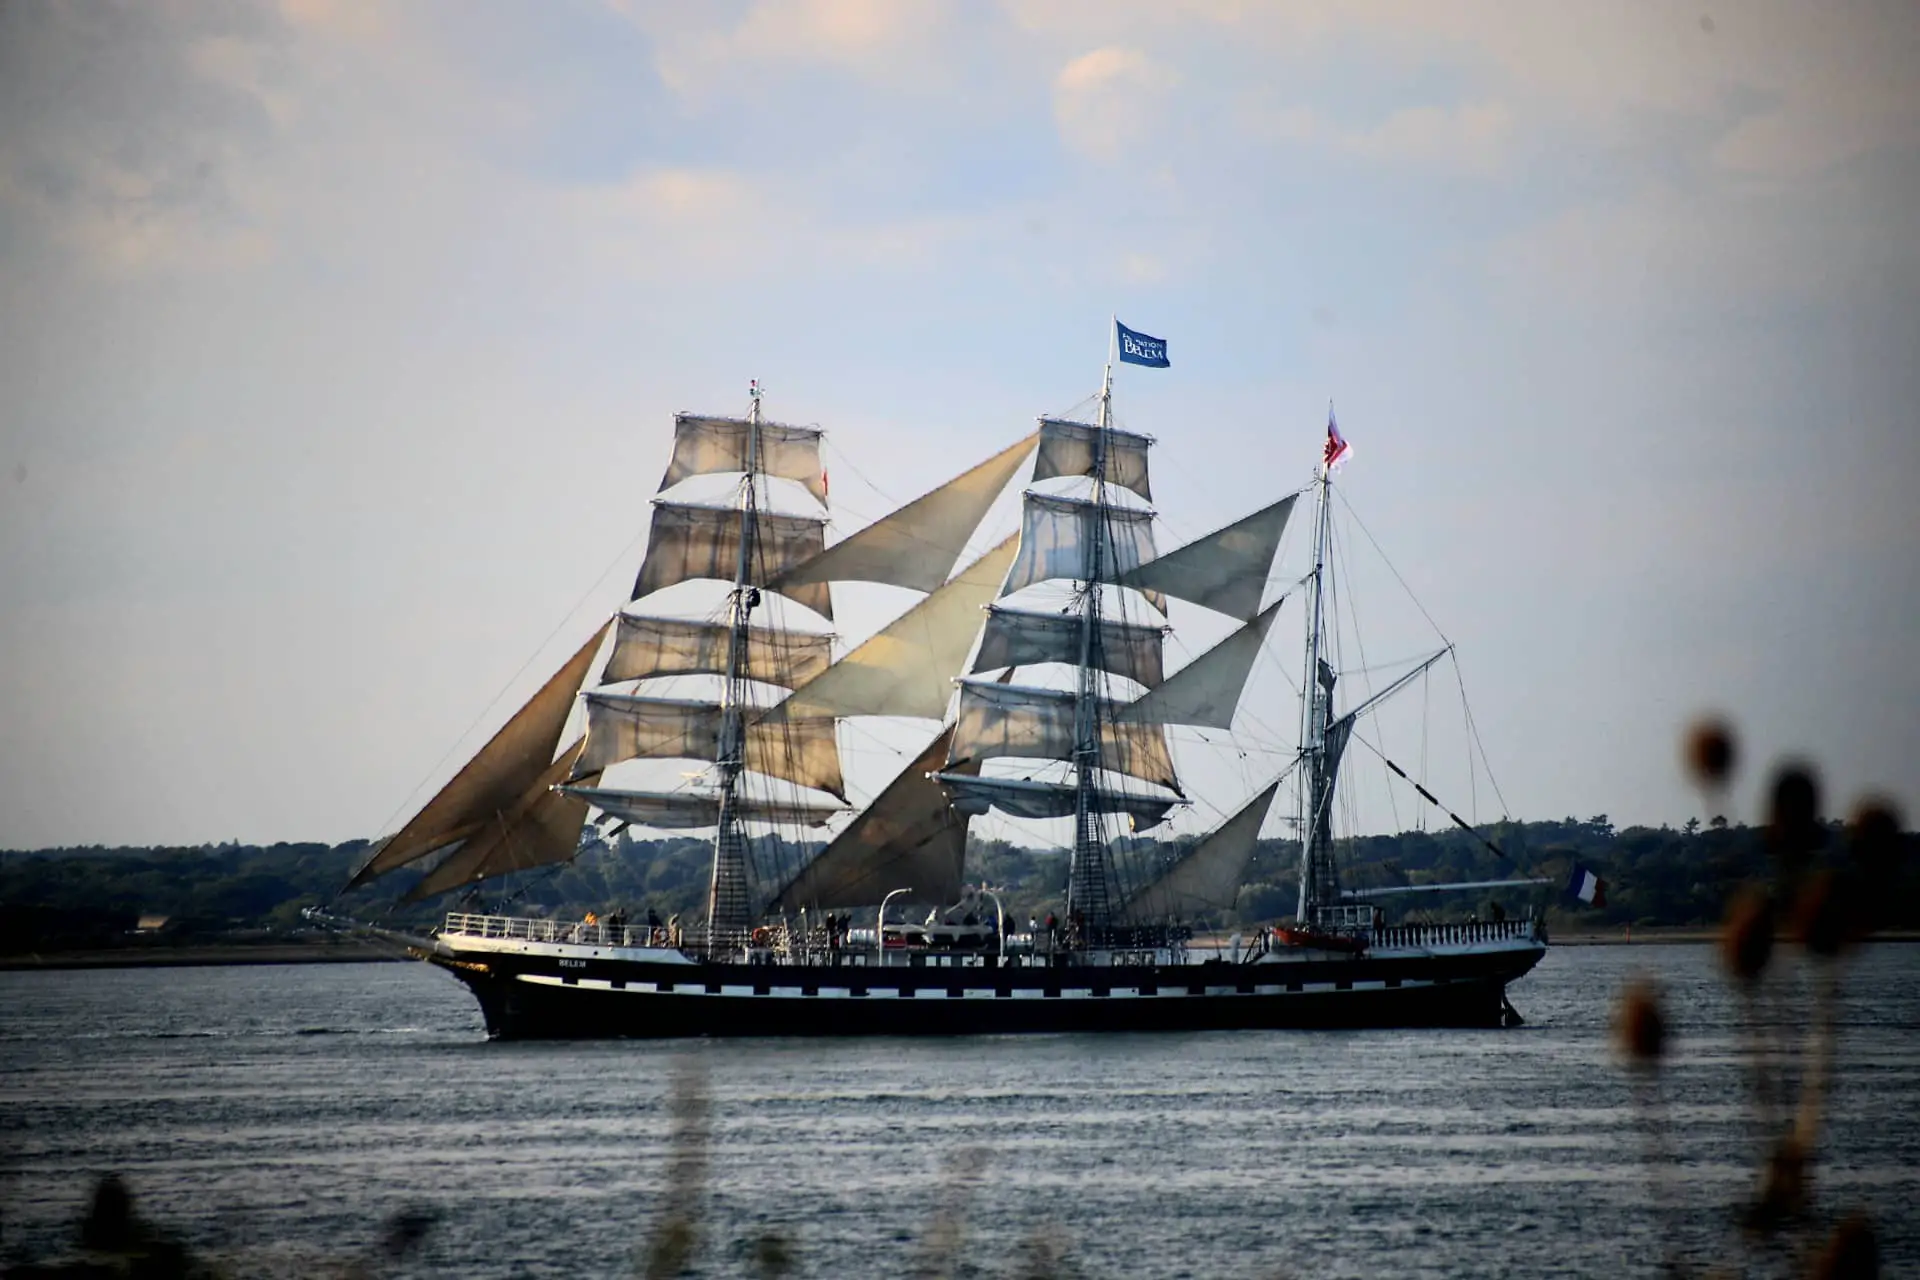 Belem Tall Ship passing the Isle of Wight by Green Man Rubbish Removal & Recycling